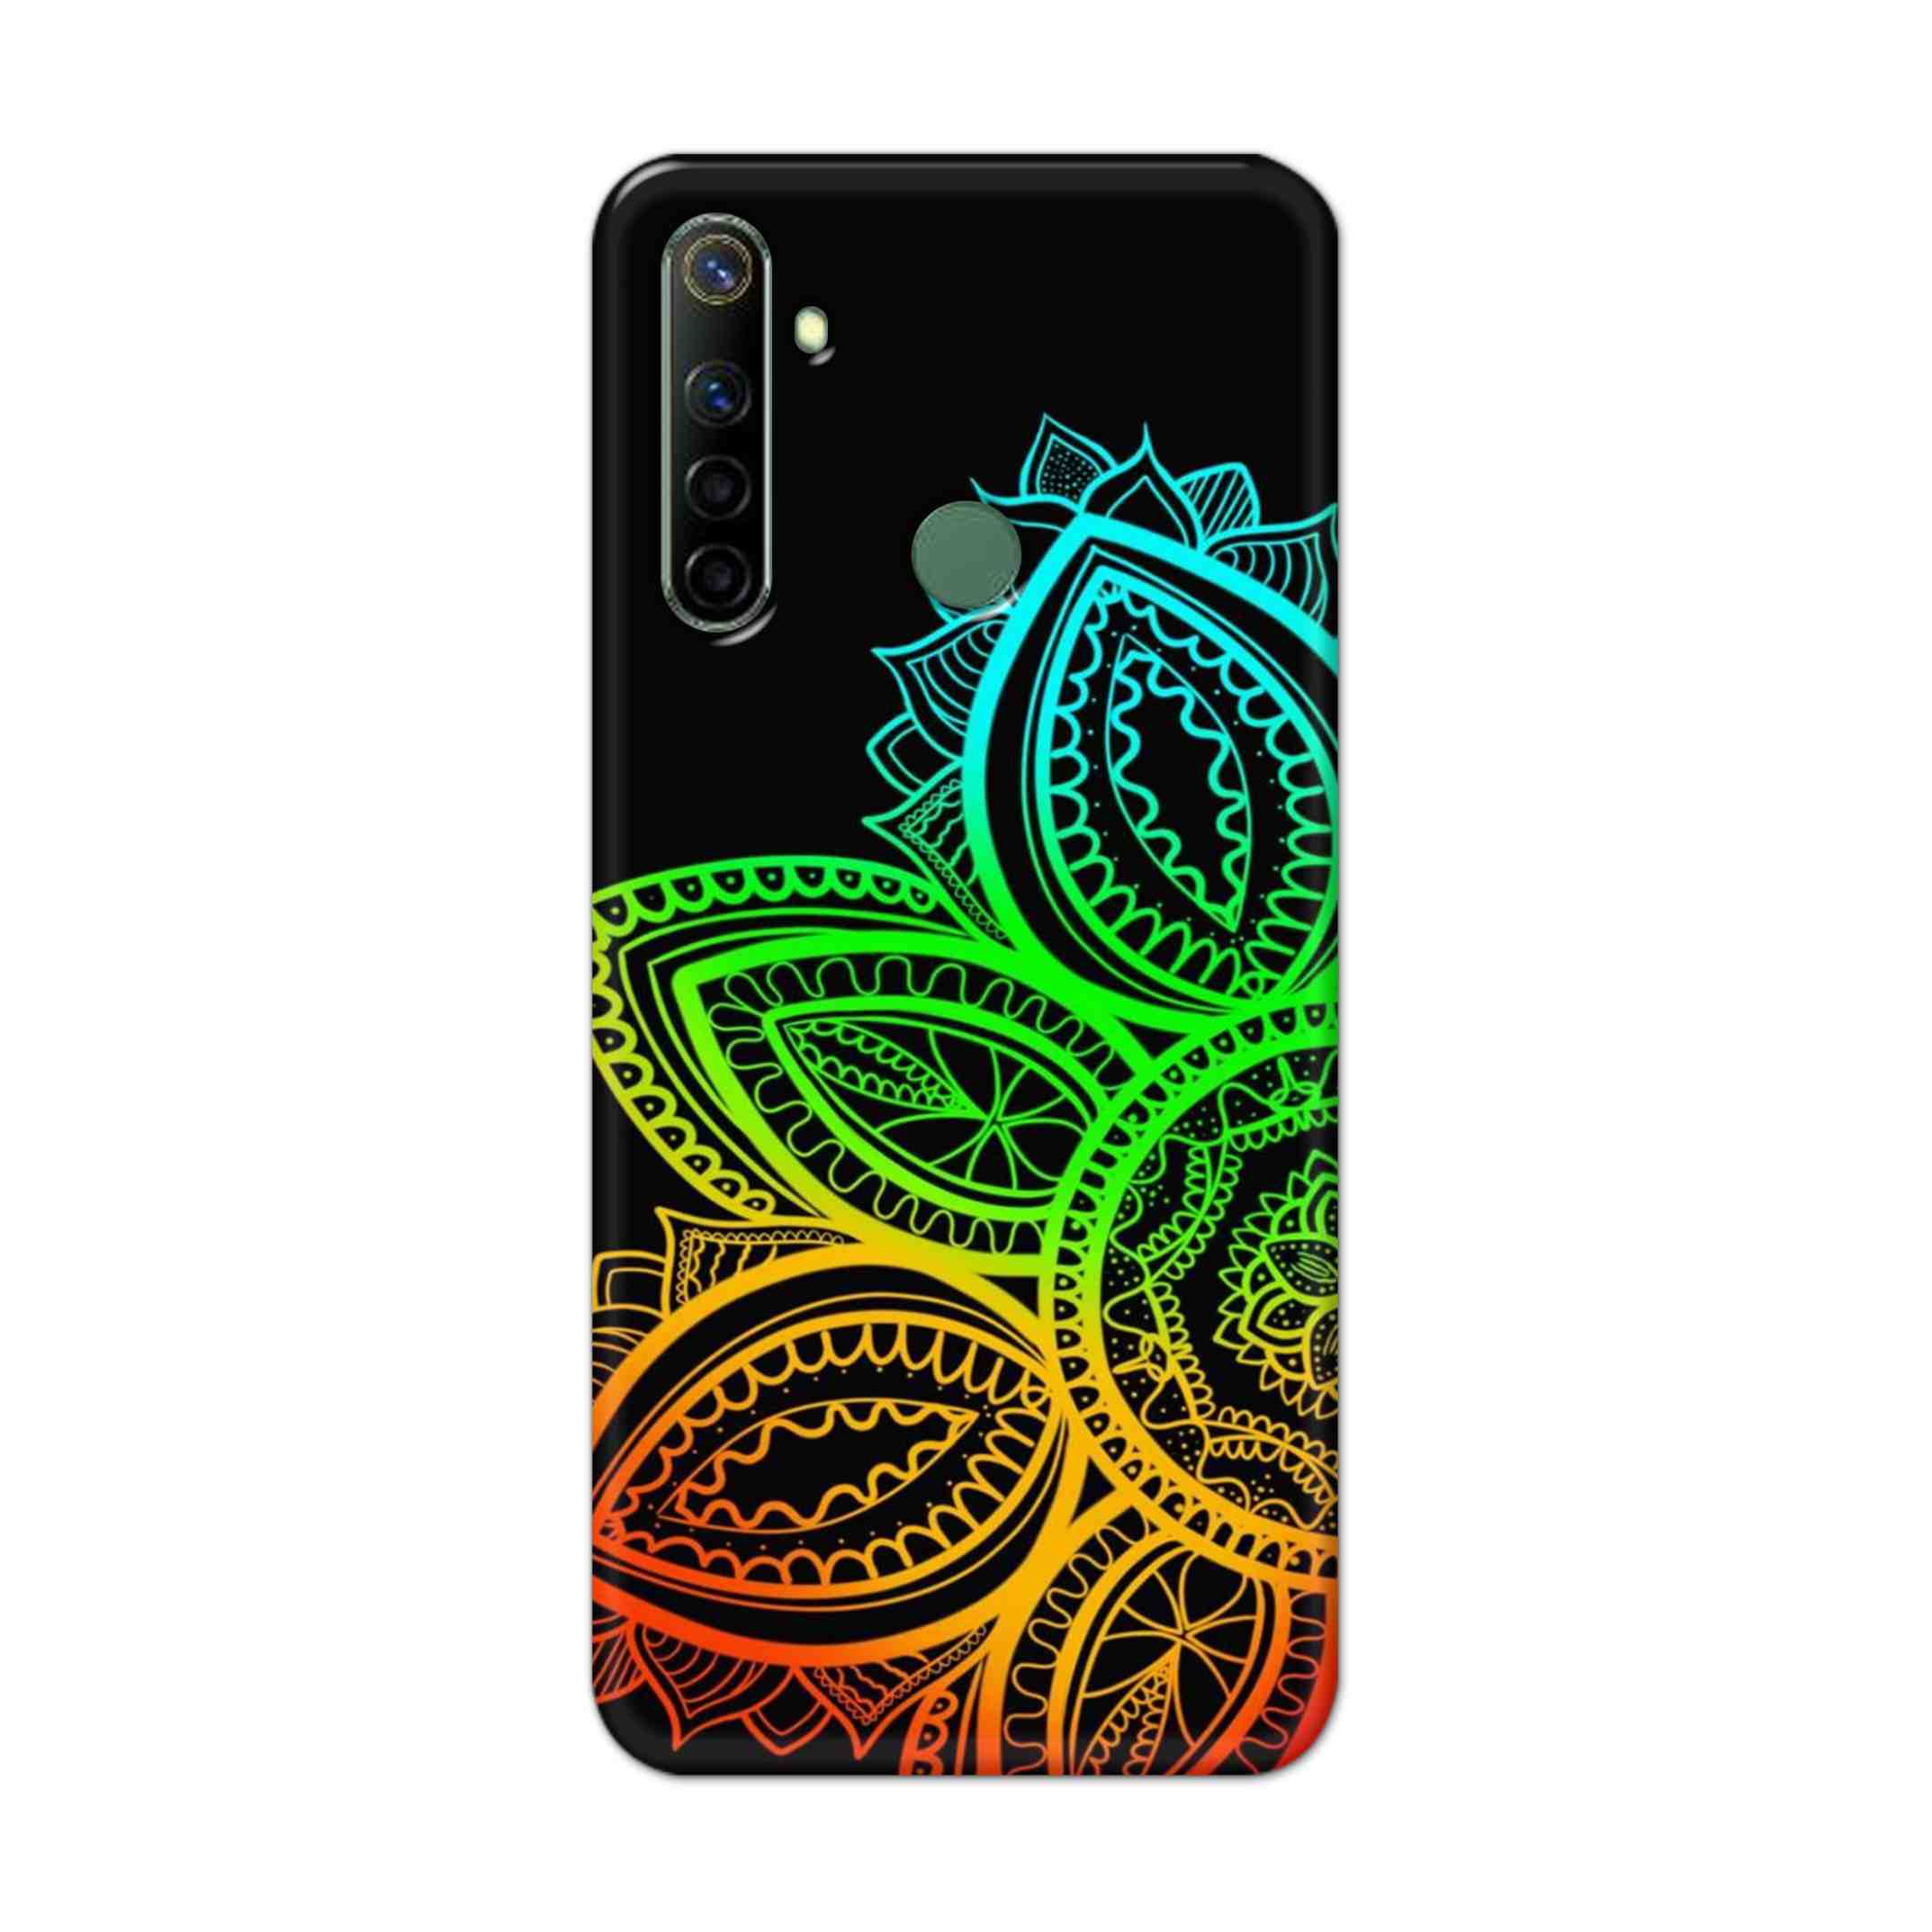 Buy Neon Mandala Hard Back Mobile Phone Case Cover For Realme Narzo 10a Online